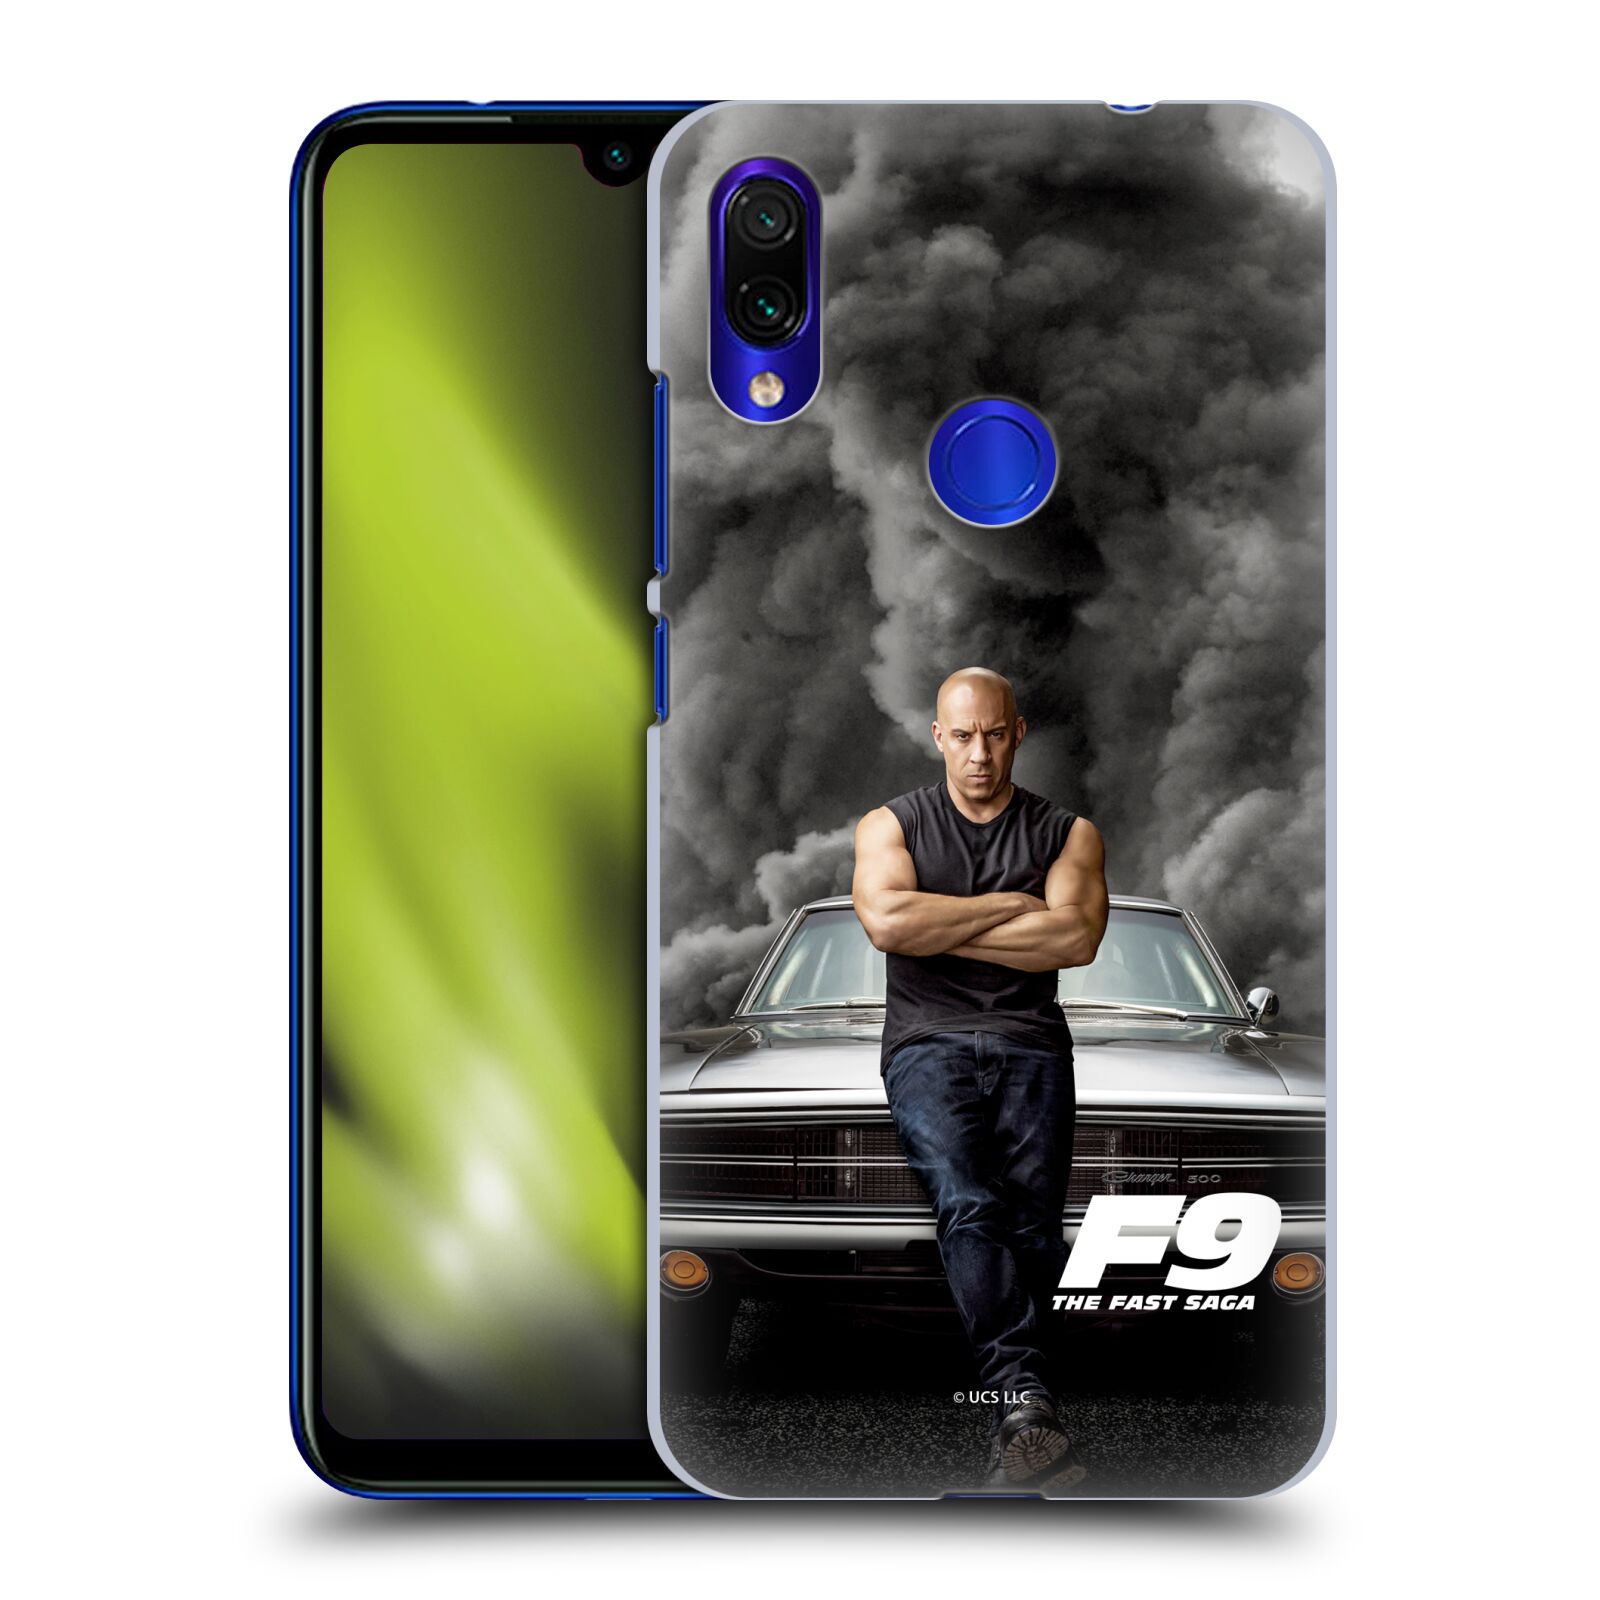 Obal na mobil Xiaomi Redmi Note 7 - HEAD CASE - Rychle a Zběsile - Dom